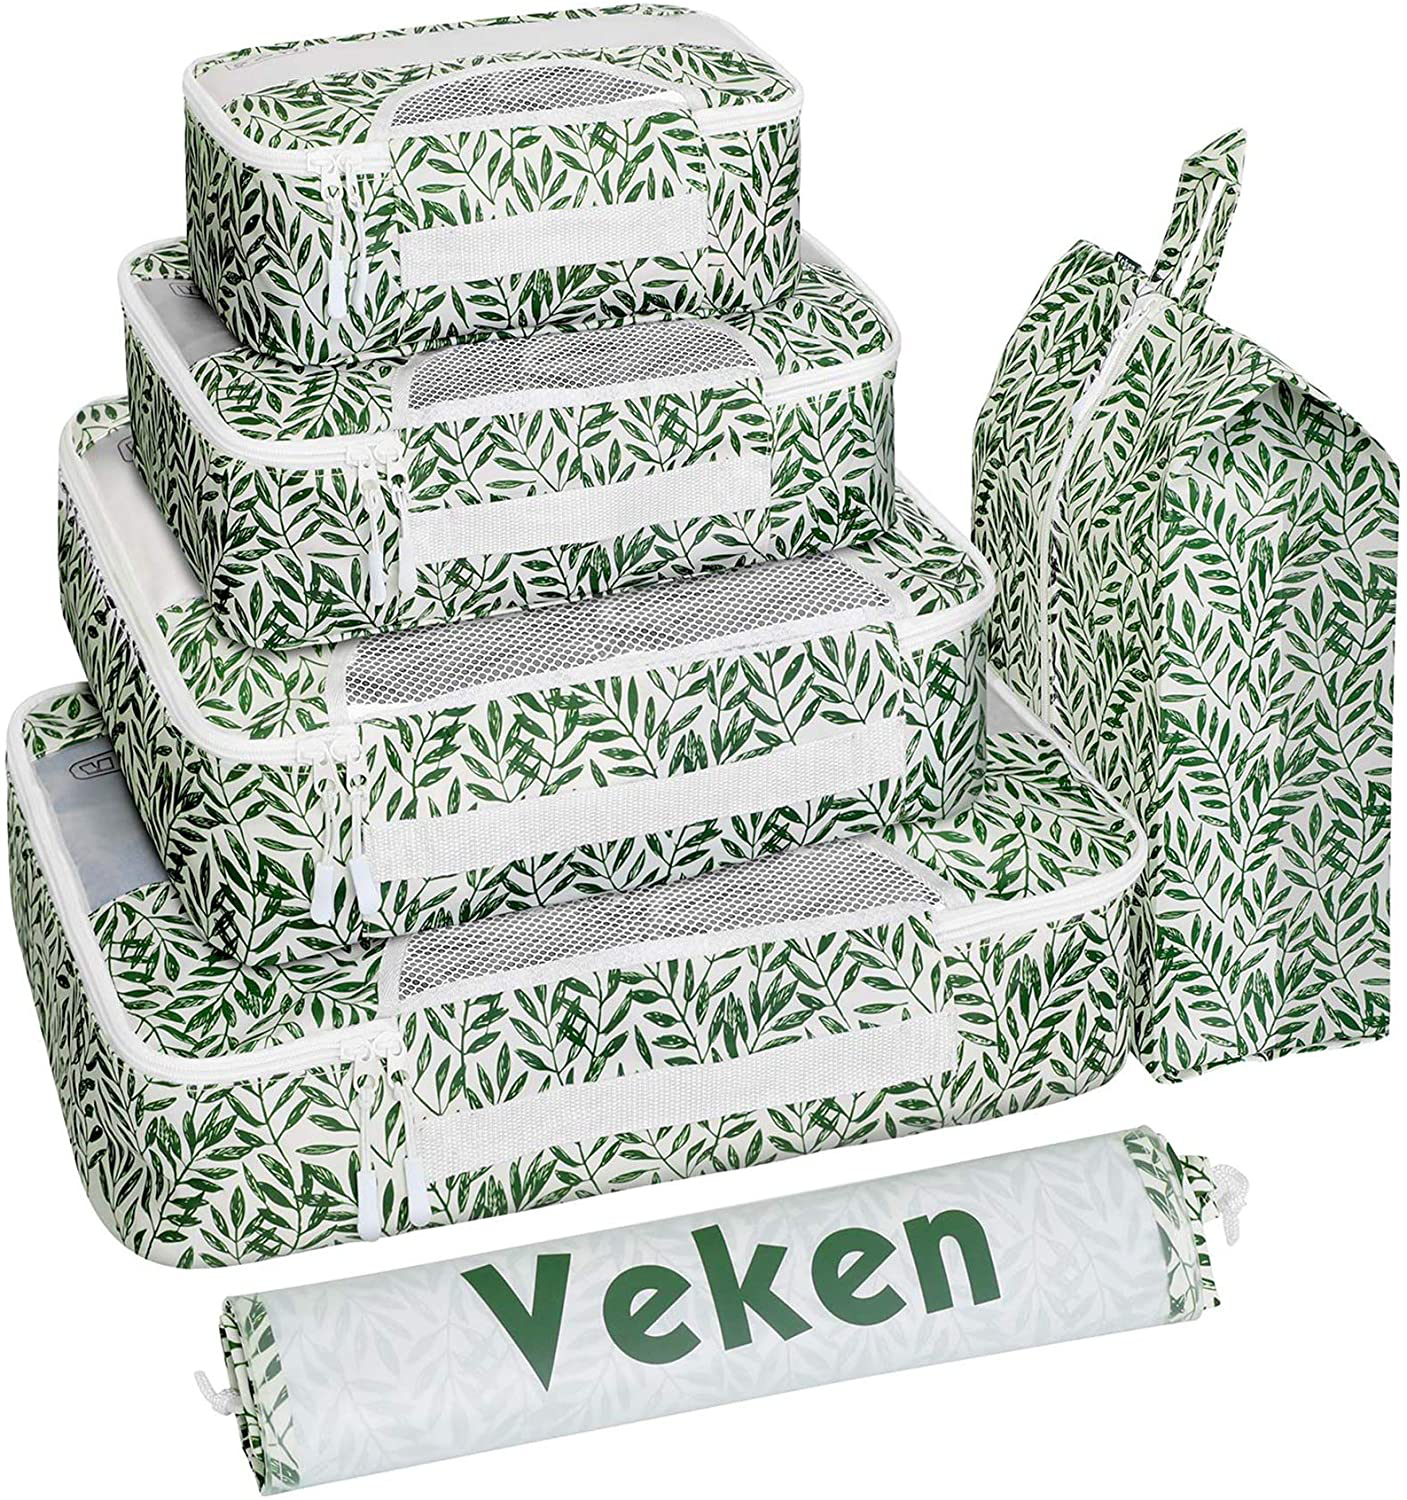 Veken 6 Set Packing Cubes, Travel Luggage Organizers with Laundry Bag & Shoe Bag